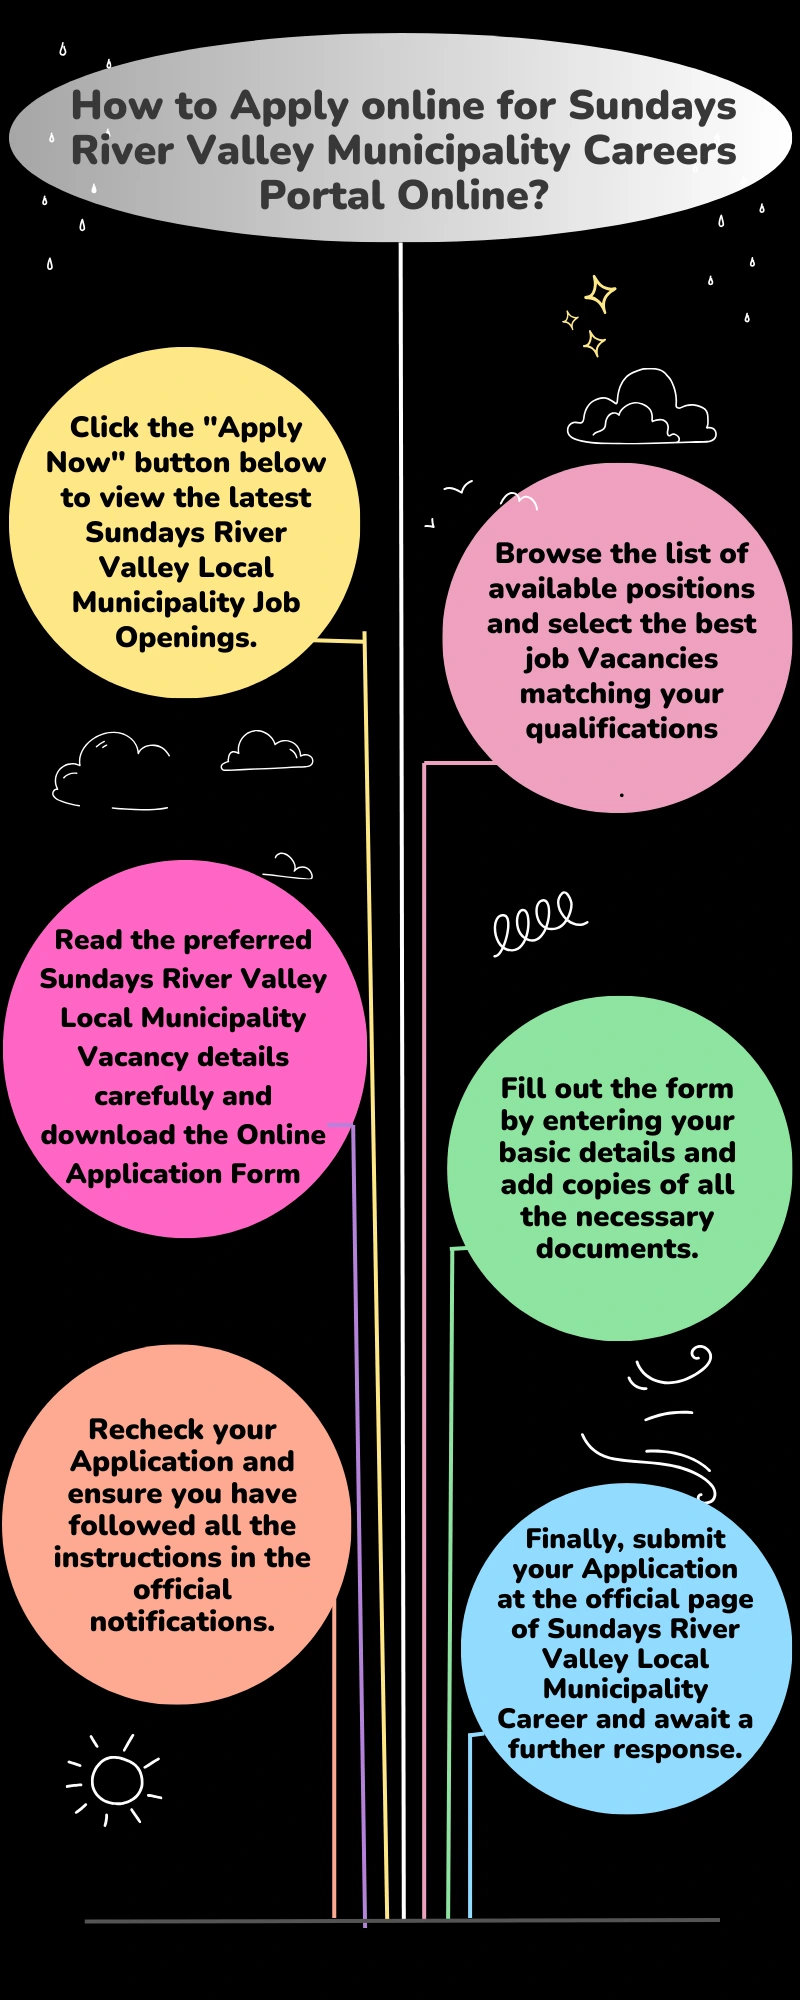 How to Apply online for Sundays River Valley Municipality Careers Portal Online?